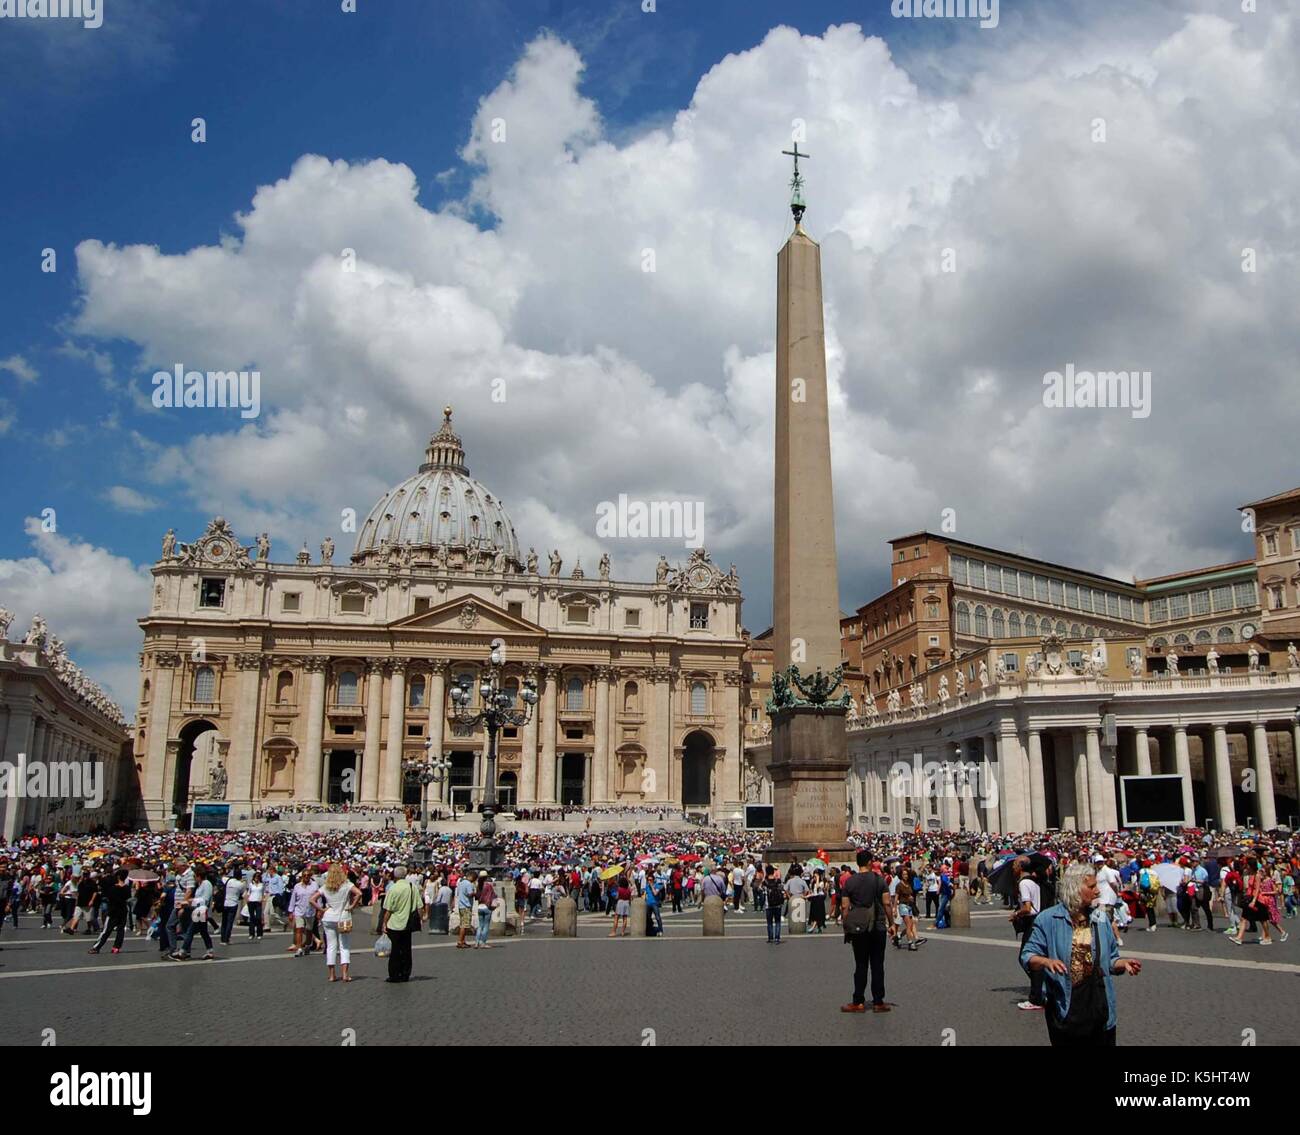 The Egyptian Obelisk and St Peter's Basilica in St Peter's square, Vatican City, Rome Stock Photo